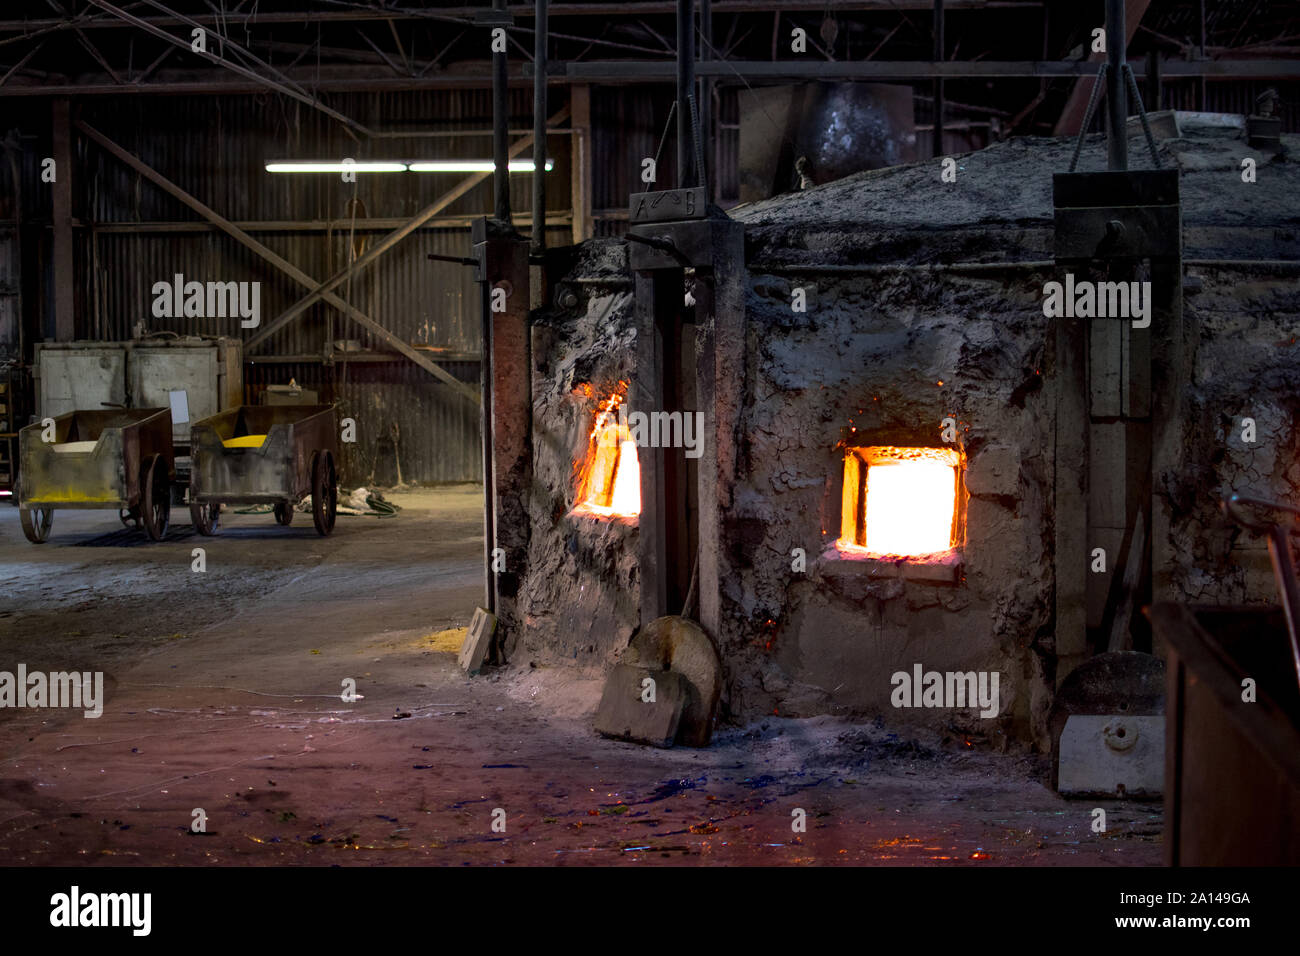 Sept 27 2019 Kokomo Indiana USA; an old kiln glows red hot, as it melts glass of many colors, used to make stained glass sheets at the oldest glass fa Stock Photo